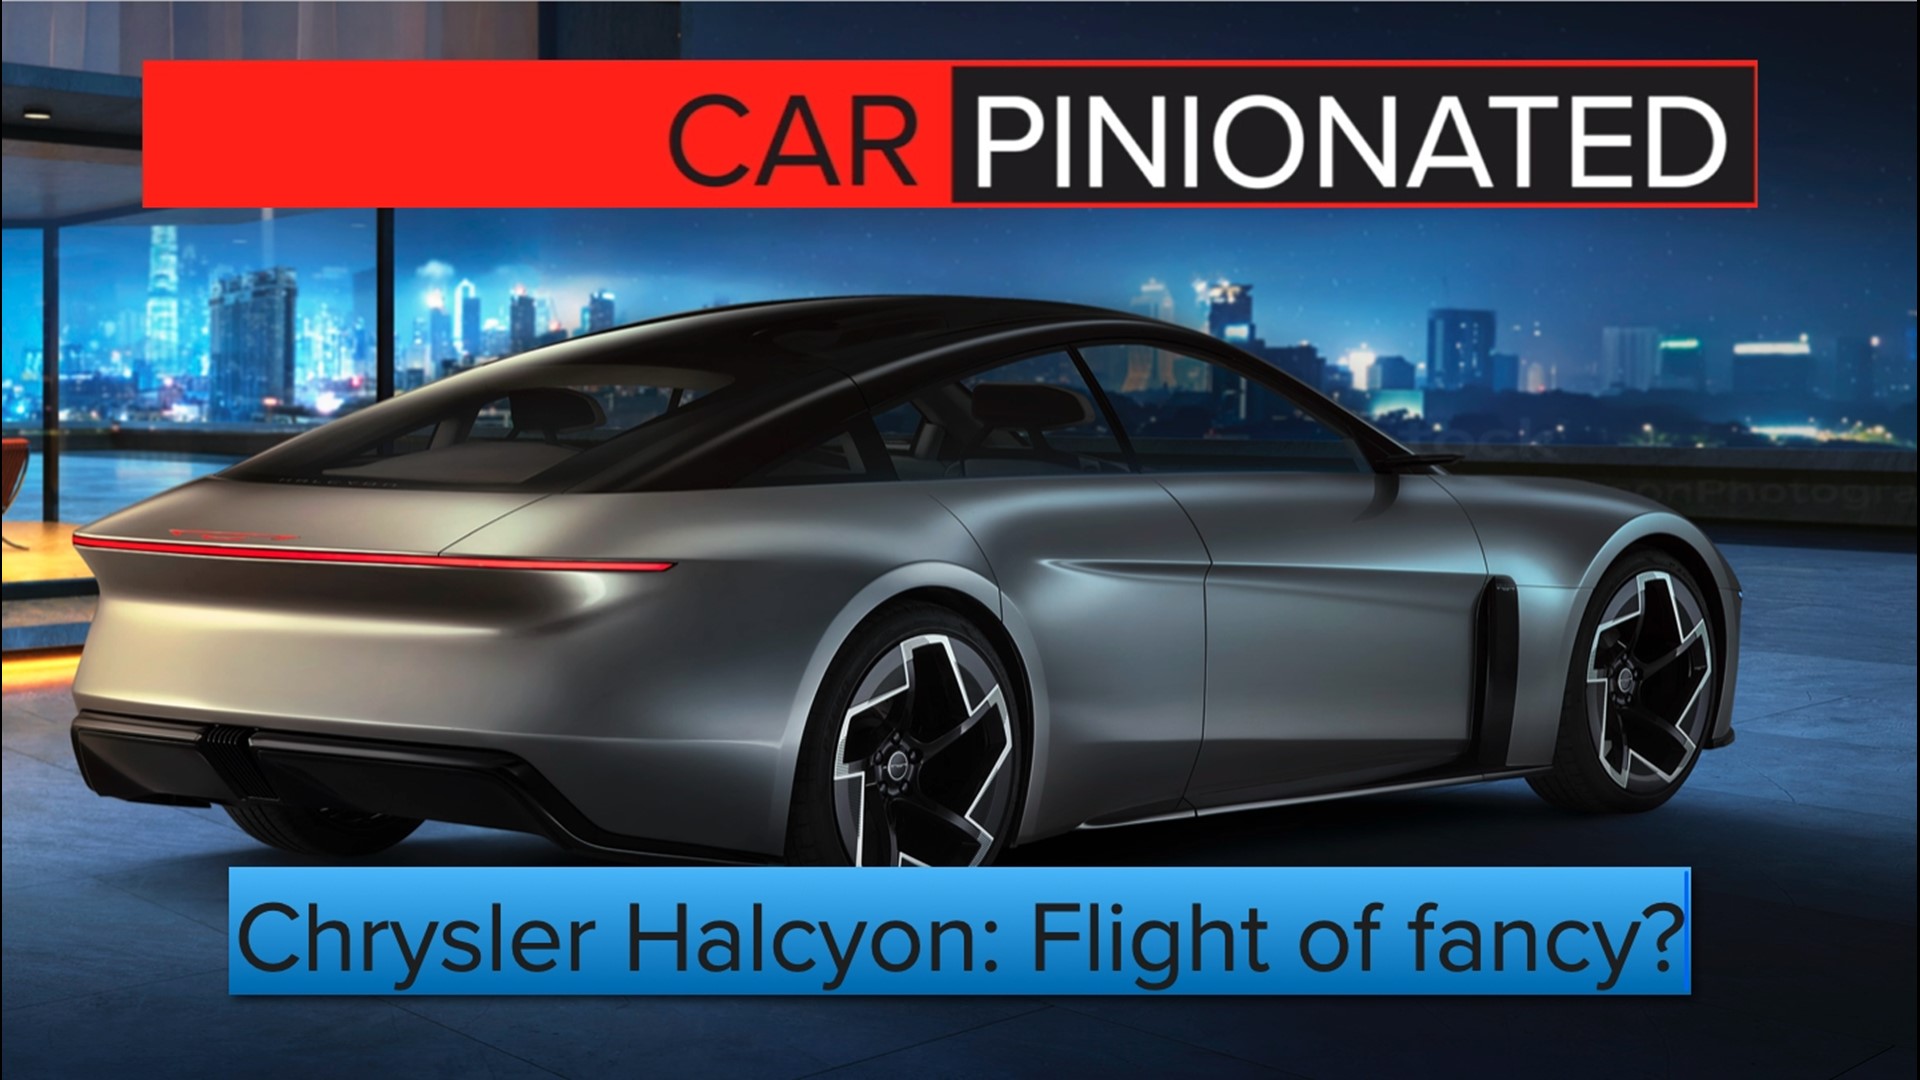 Chrysler has shown their new EV concept, the Halcyon. We have some thoughts.